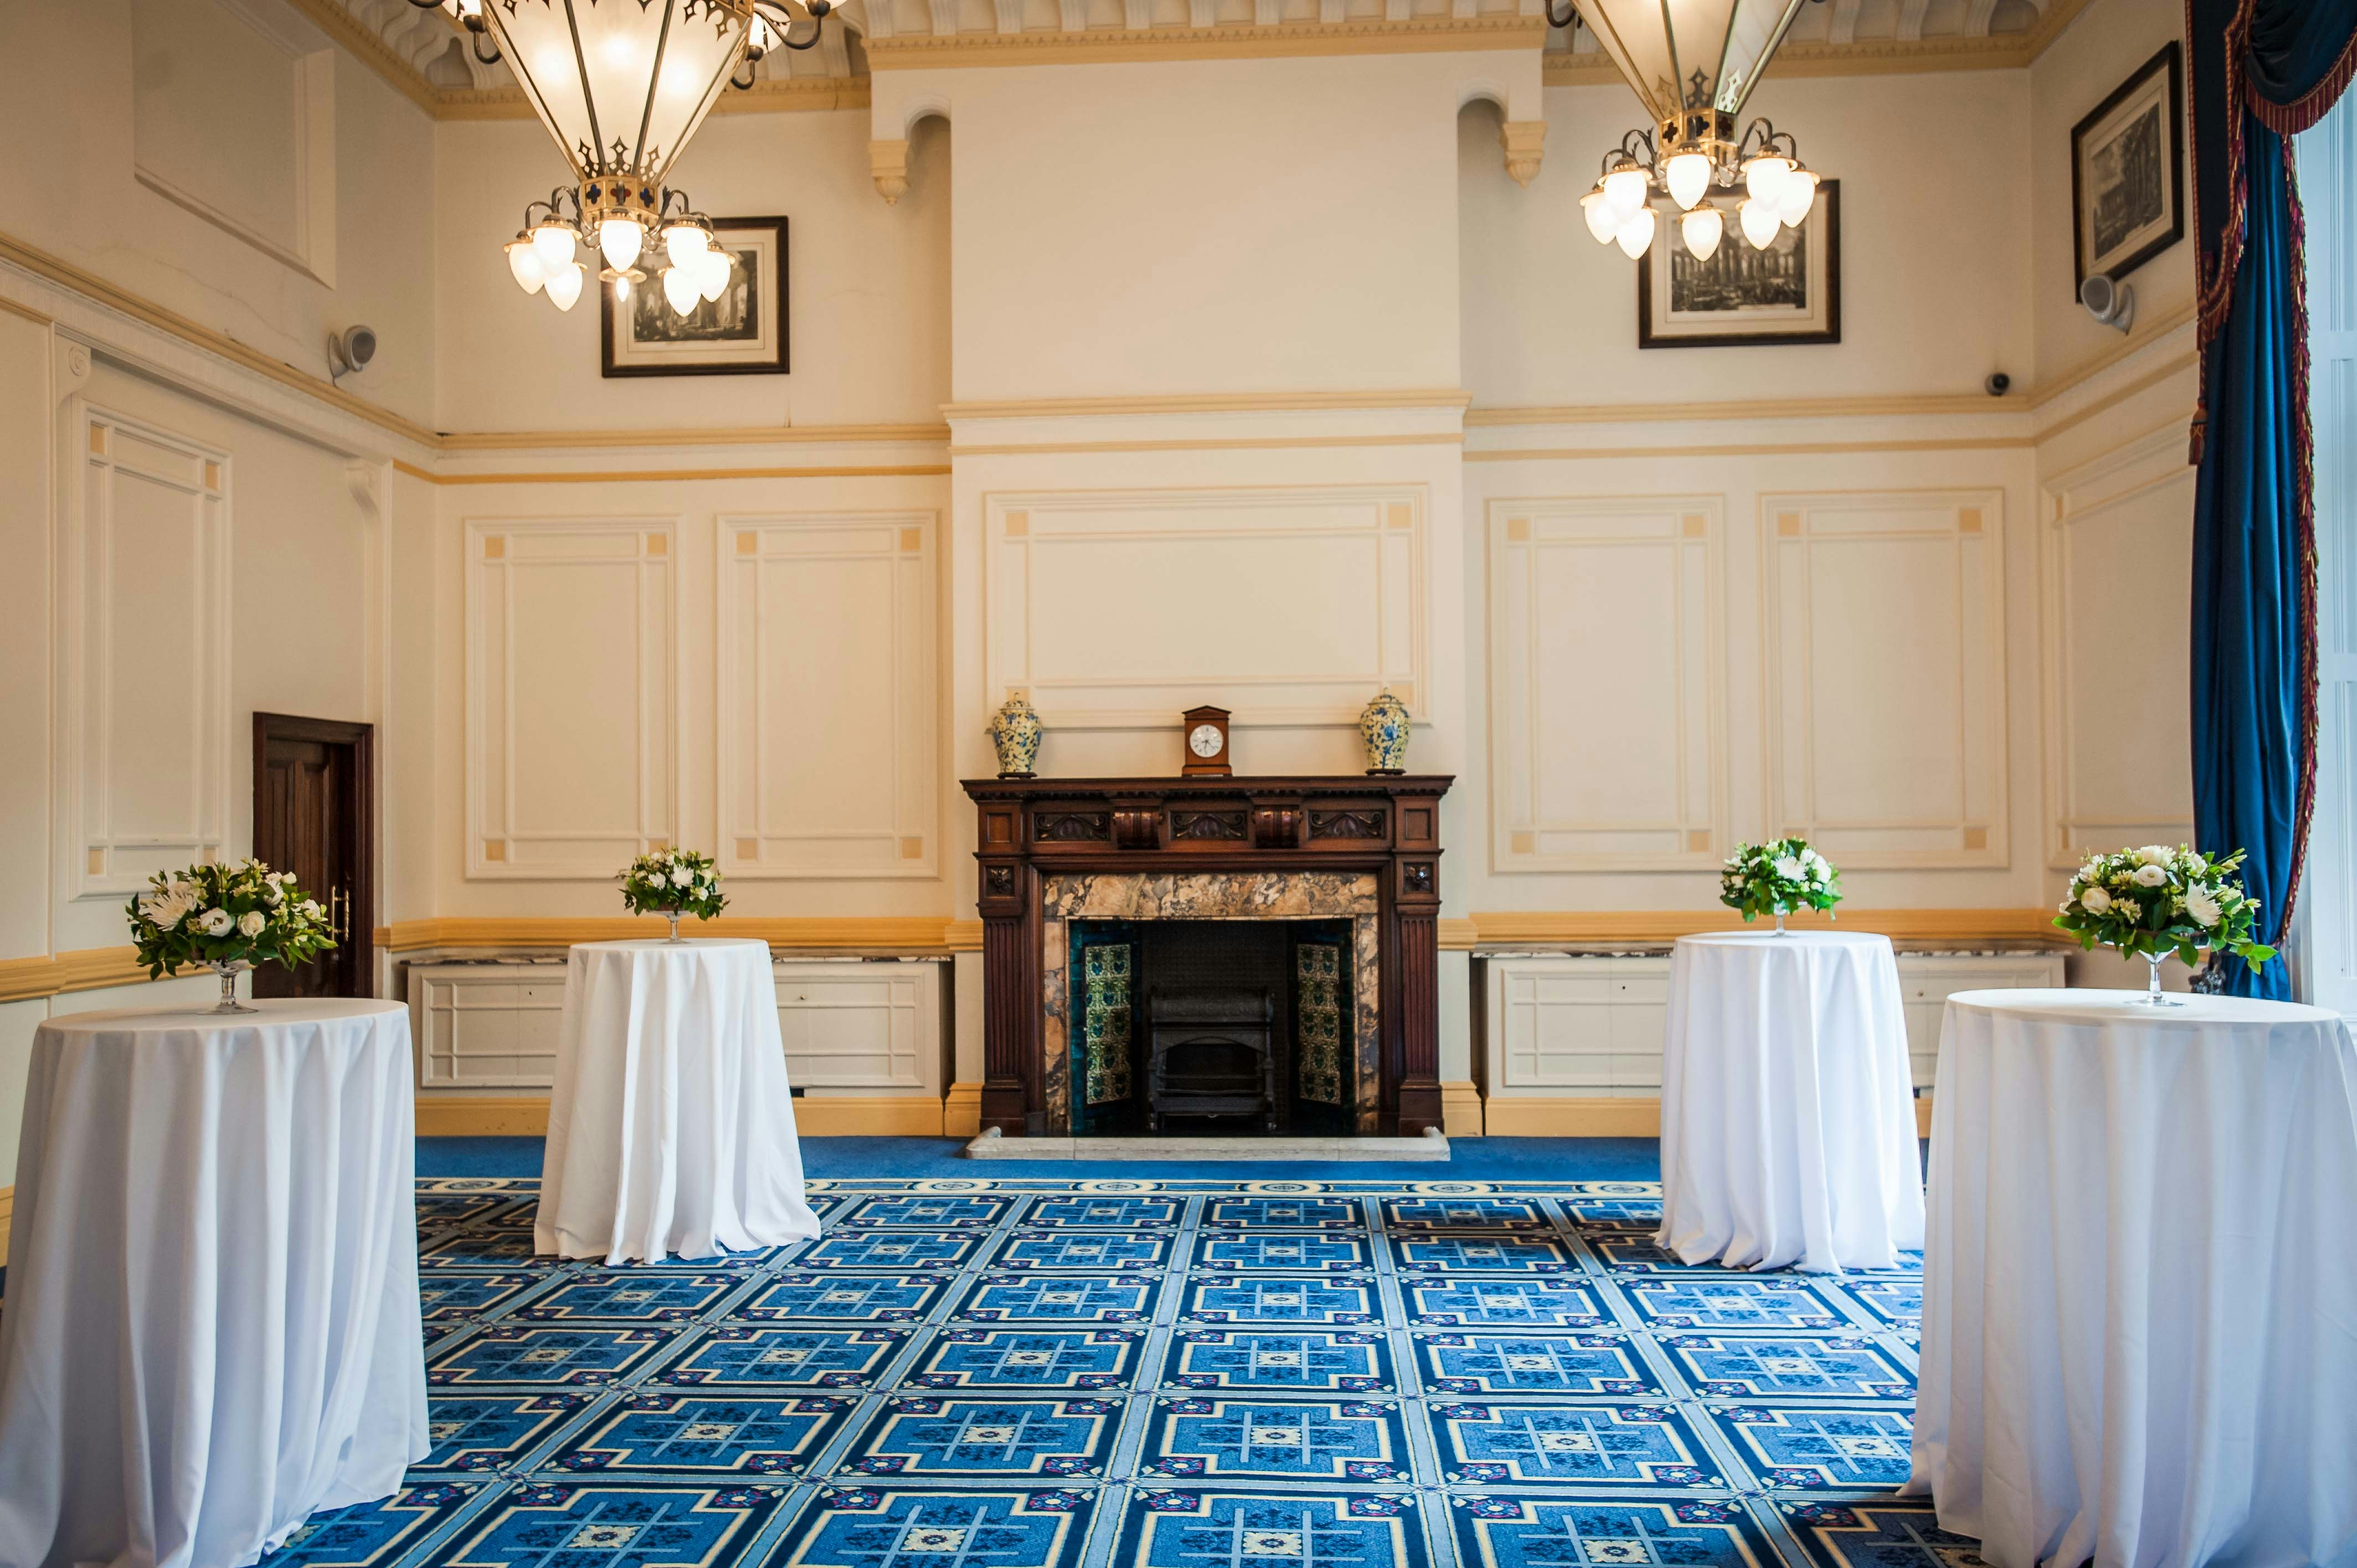 Baby Shower Venues in London - The Royal Horseguards Hotel and One Whitehall Place